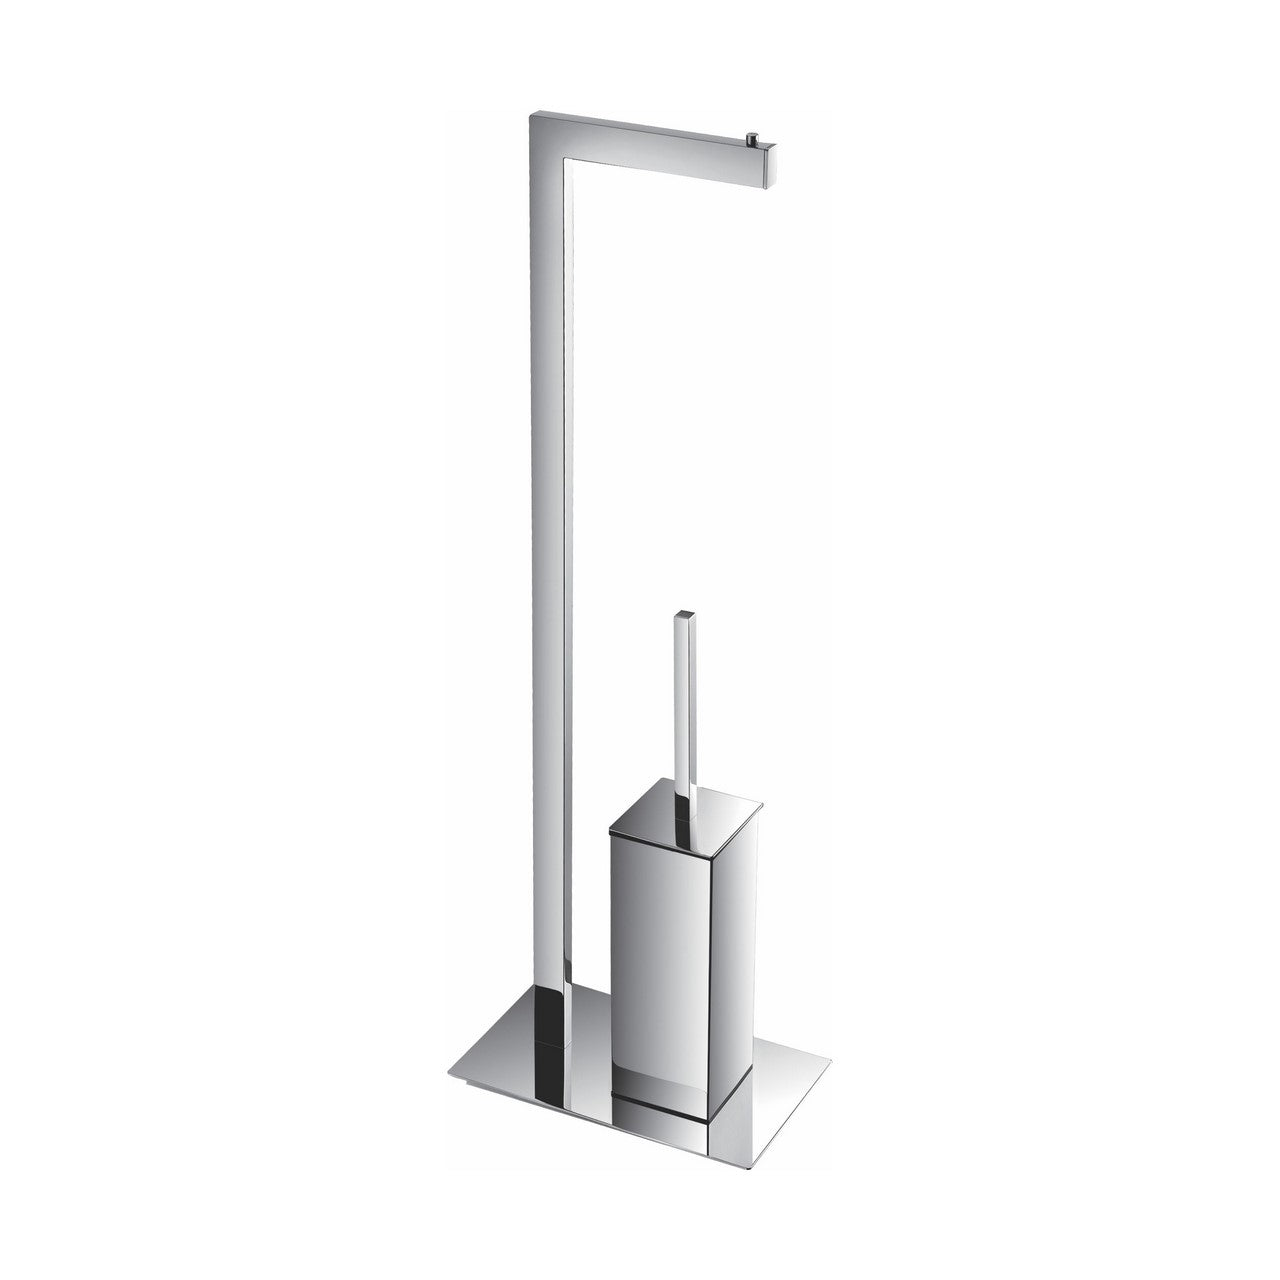 Aqua Piazza Free Standing Toilet Paper Holder With Toilet Brush – Chrome